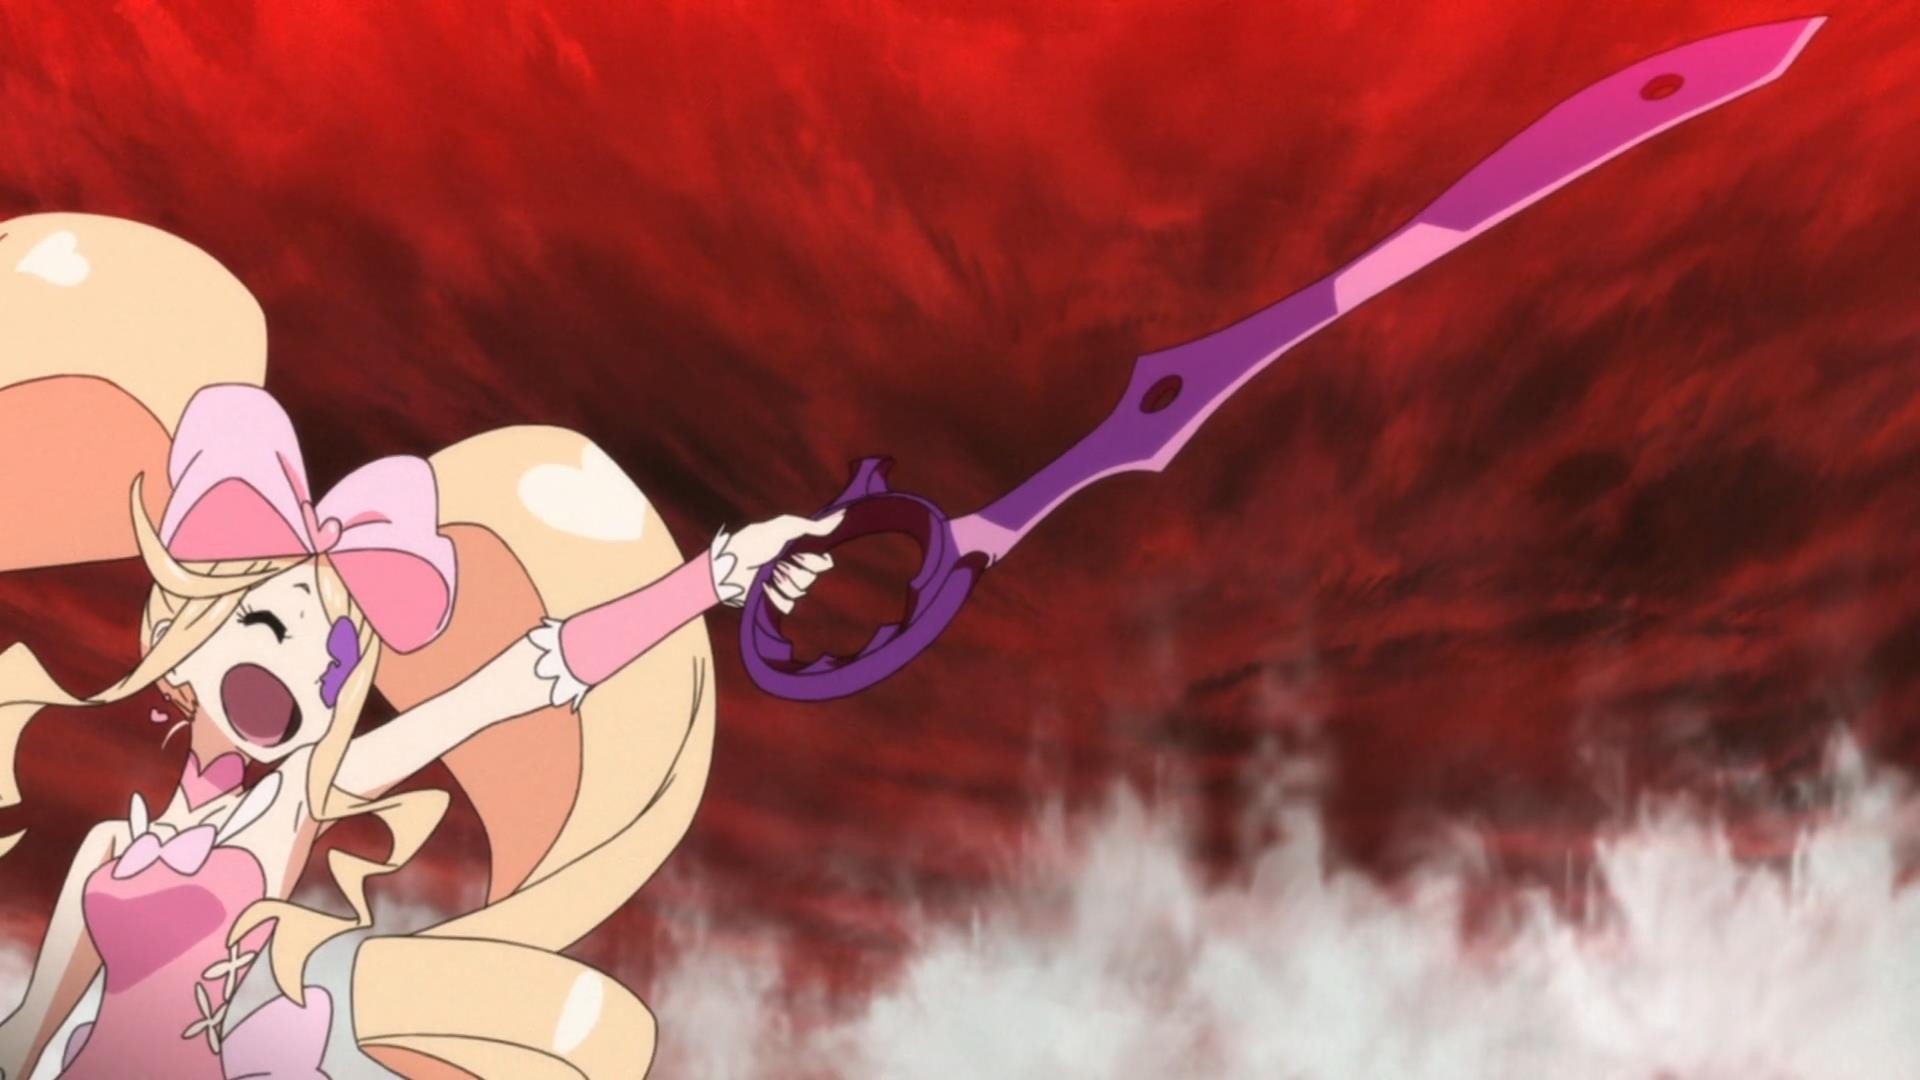 Anime 1920x1080 Kill la Kill Harime Nui anime girls open mouth blonde anime sword women with swords red background long hair